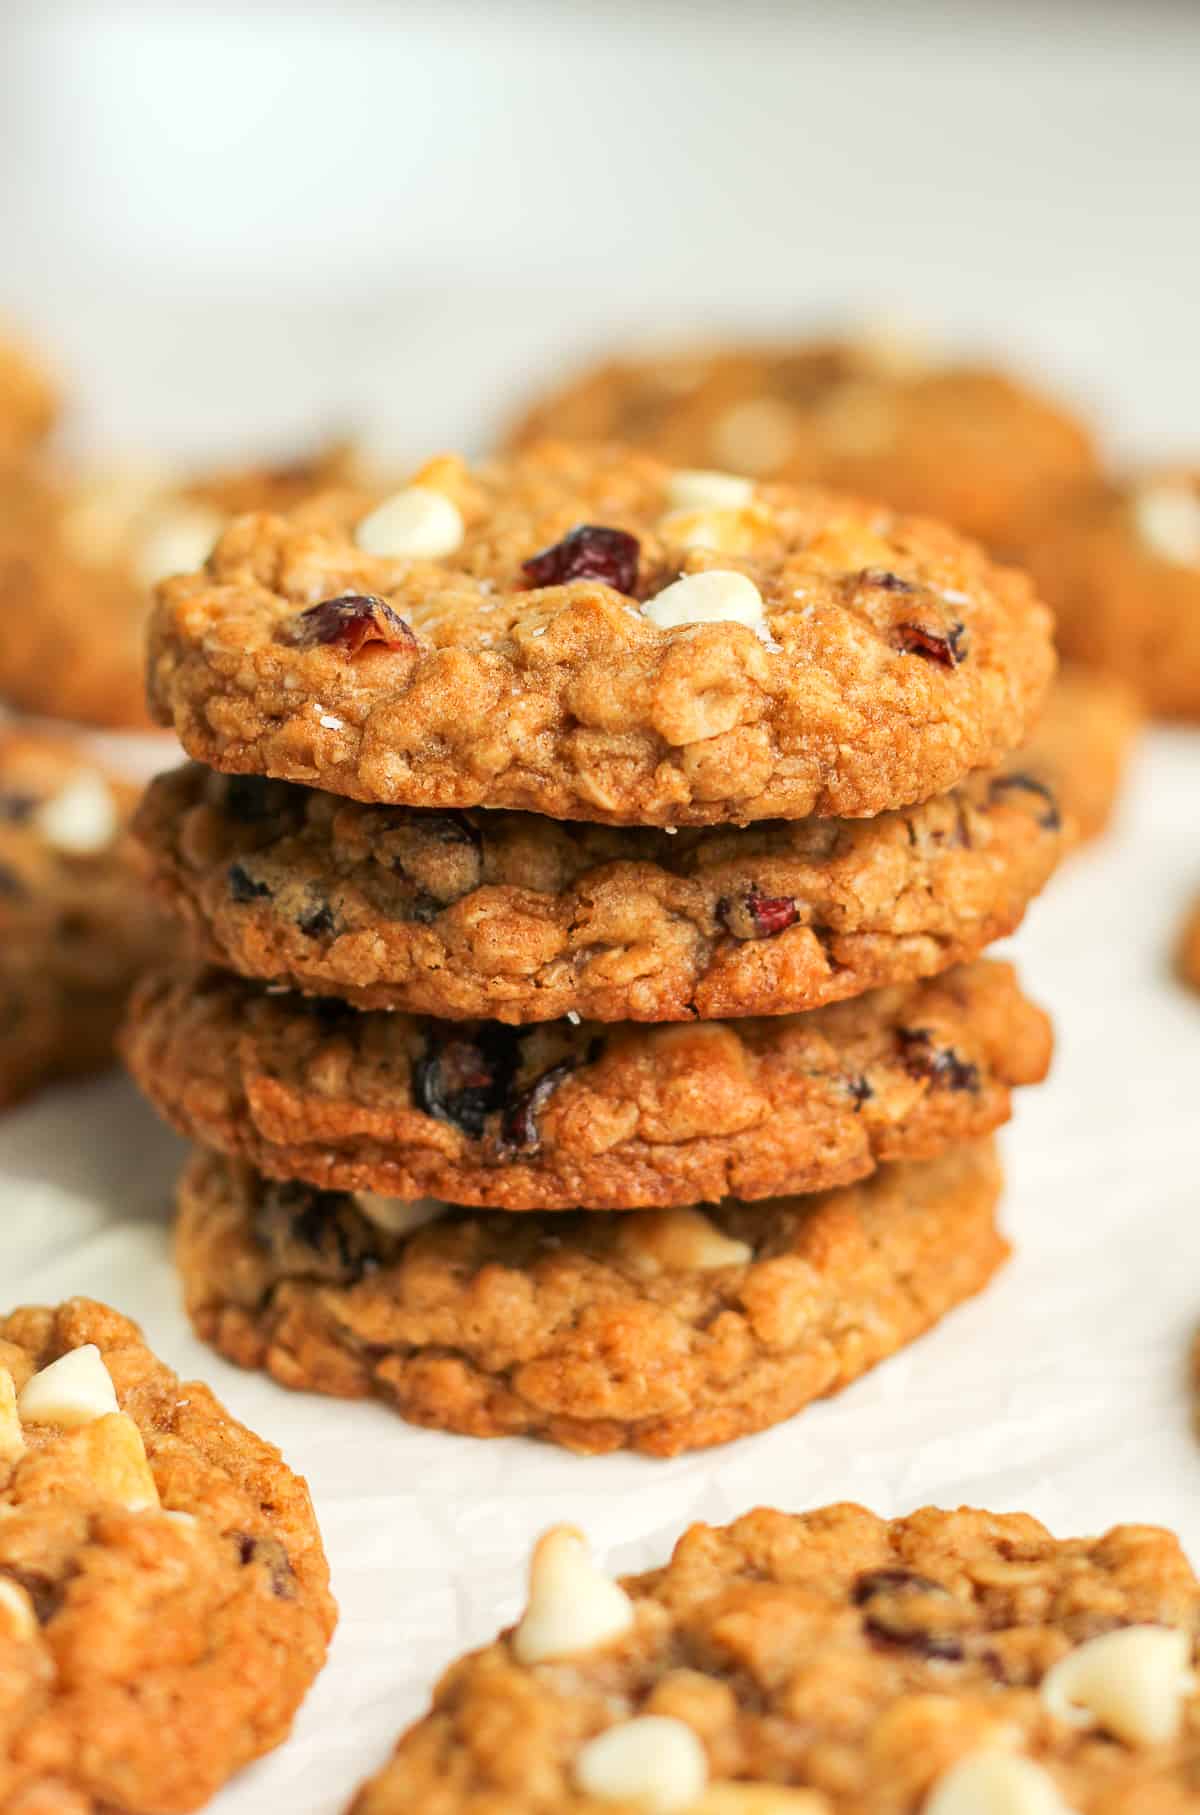 A stack of four oatmeal cookies.